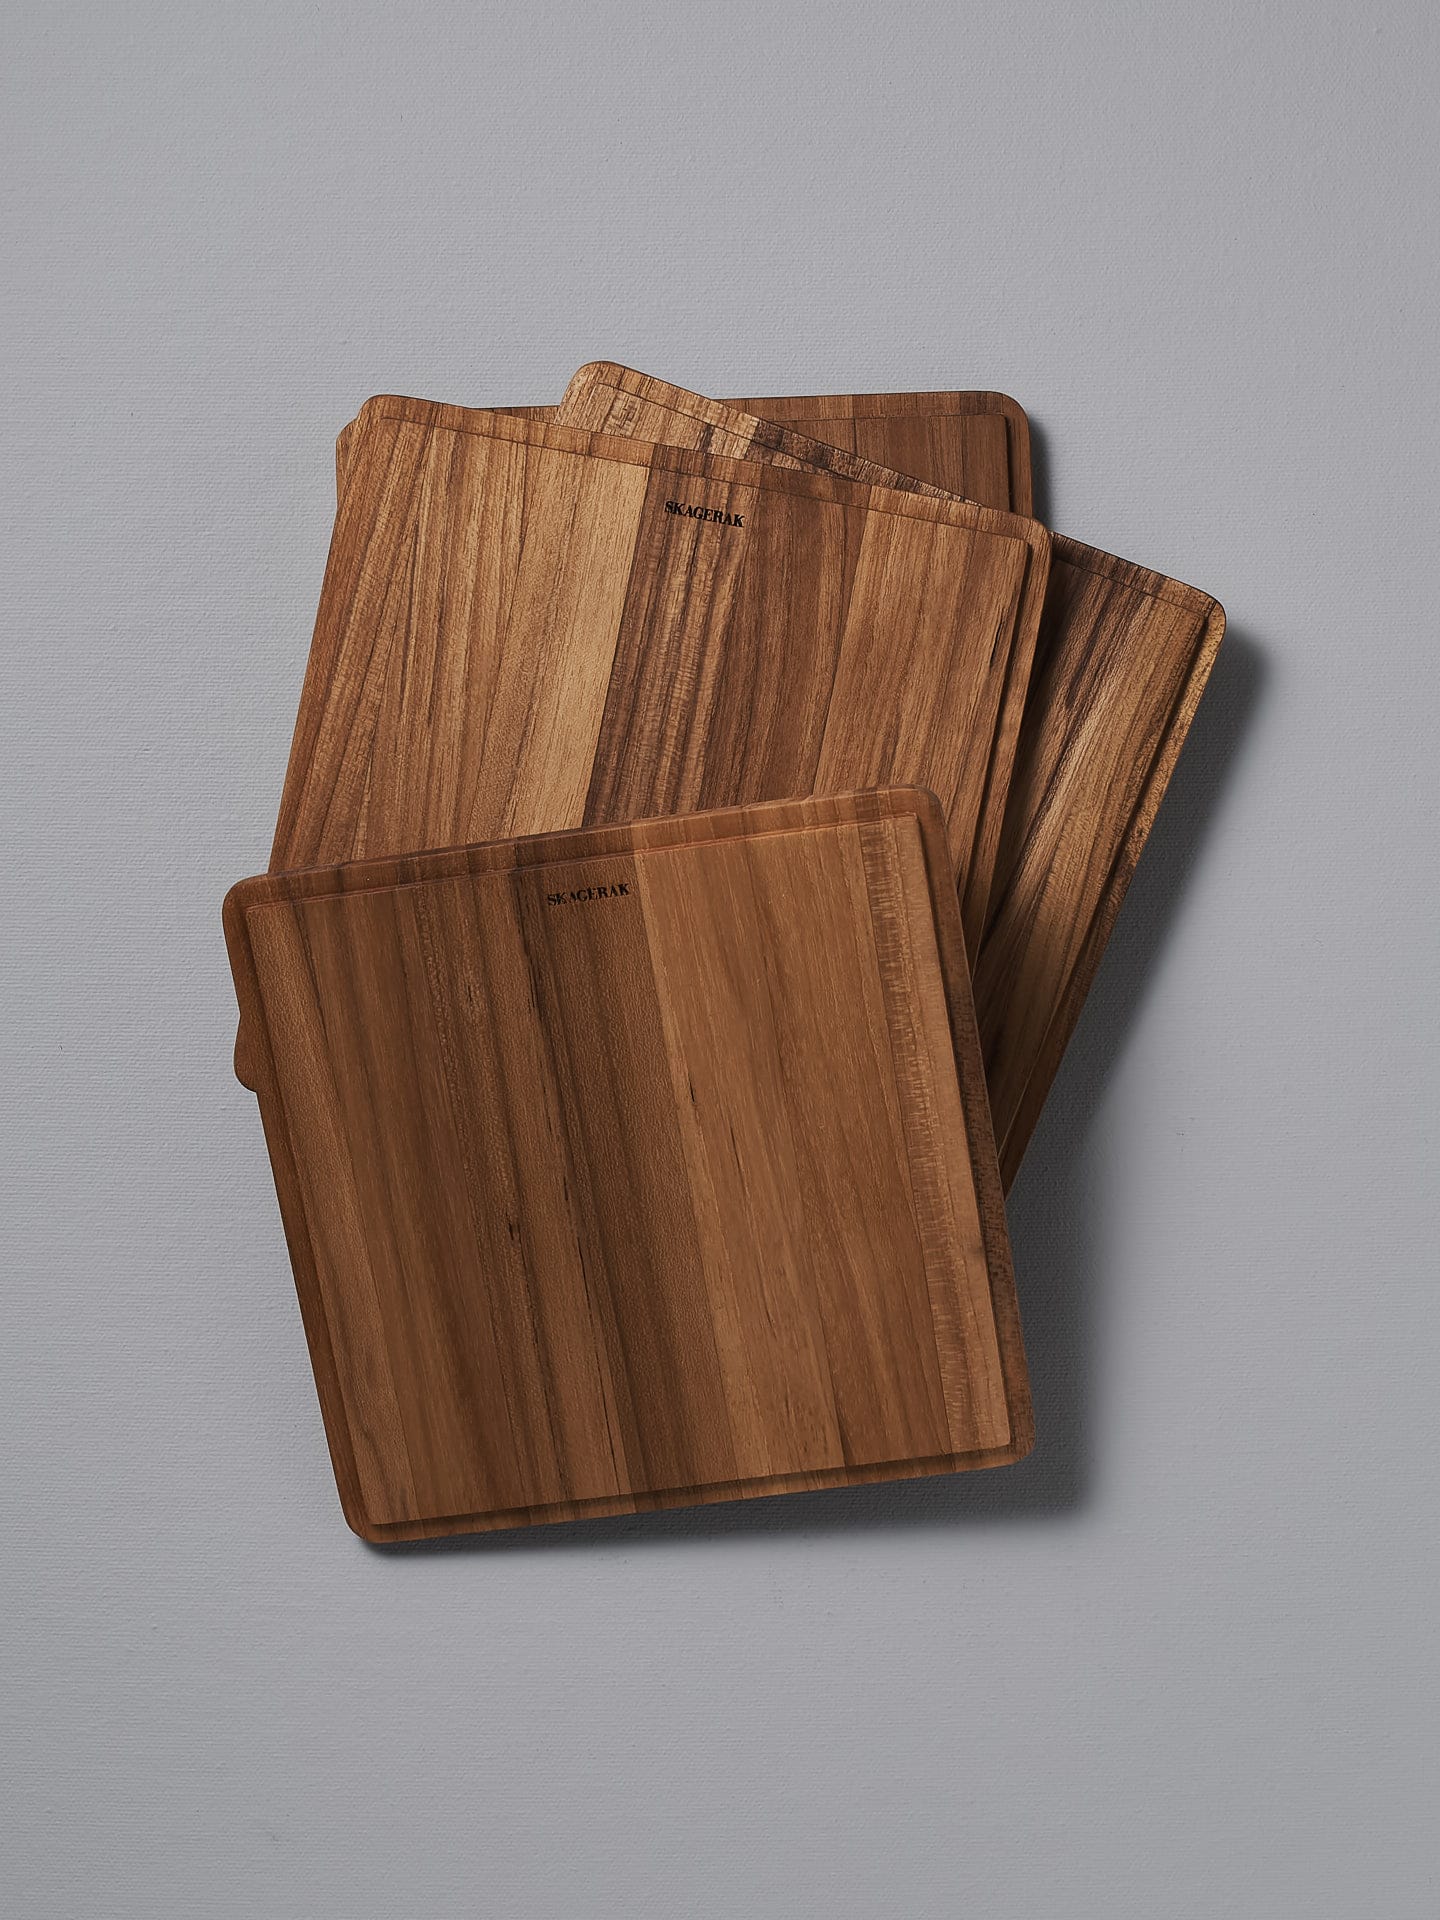 Four Skagerak Plank Square Trencher 4pcs – Teak cutting boards on a grey surface.